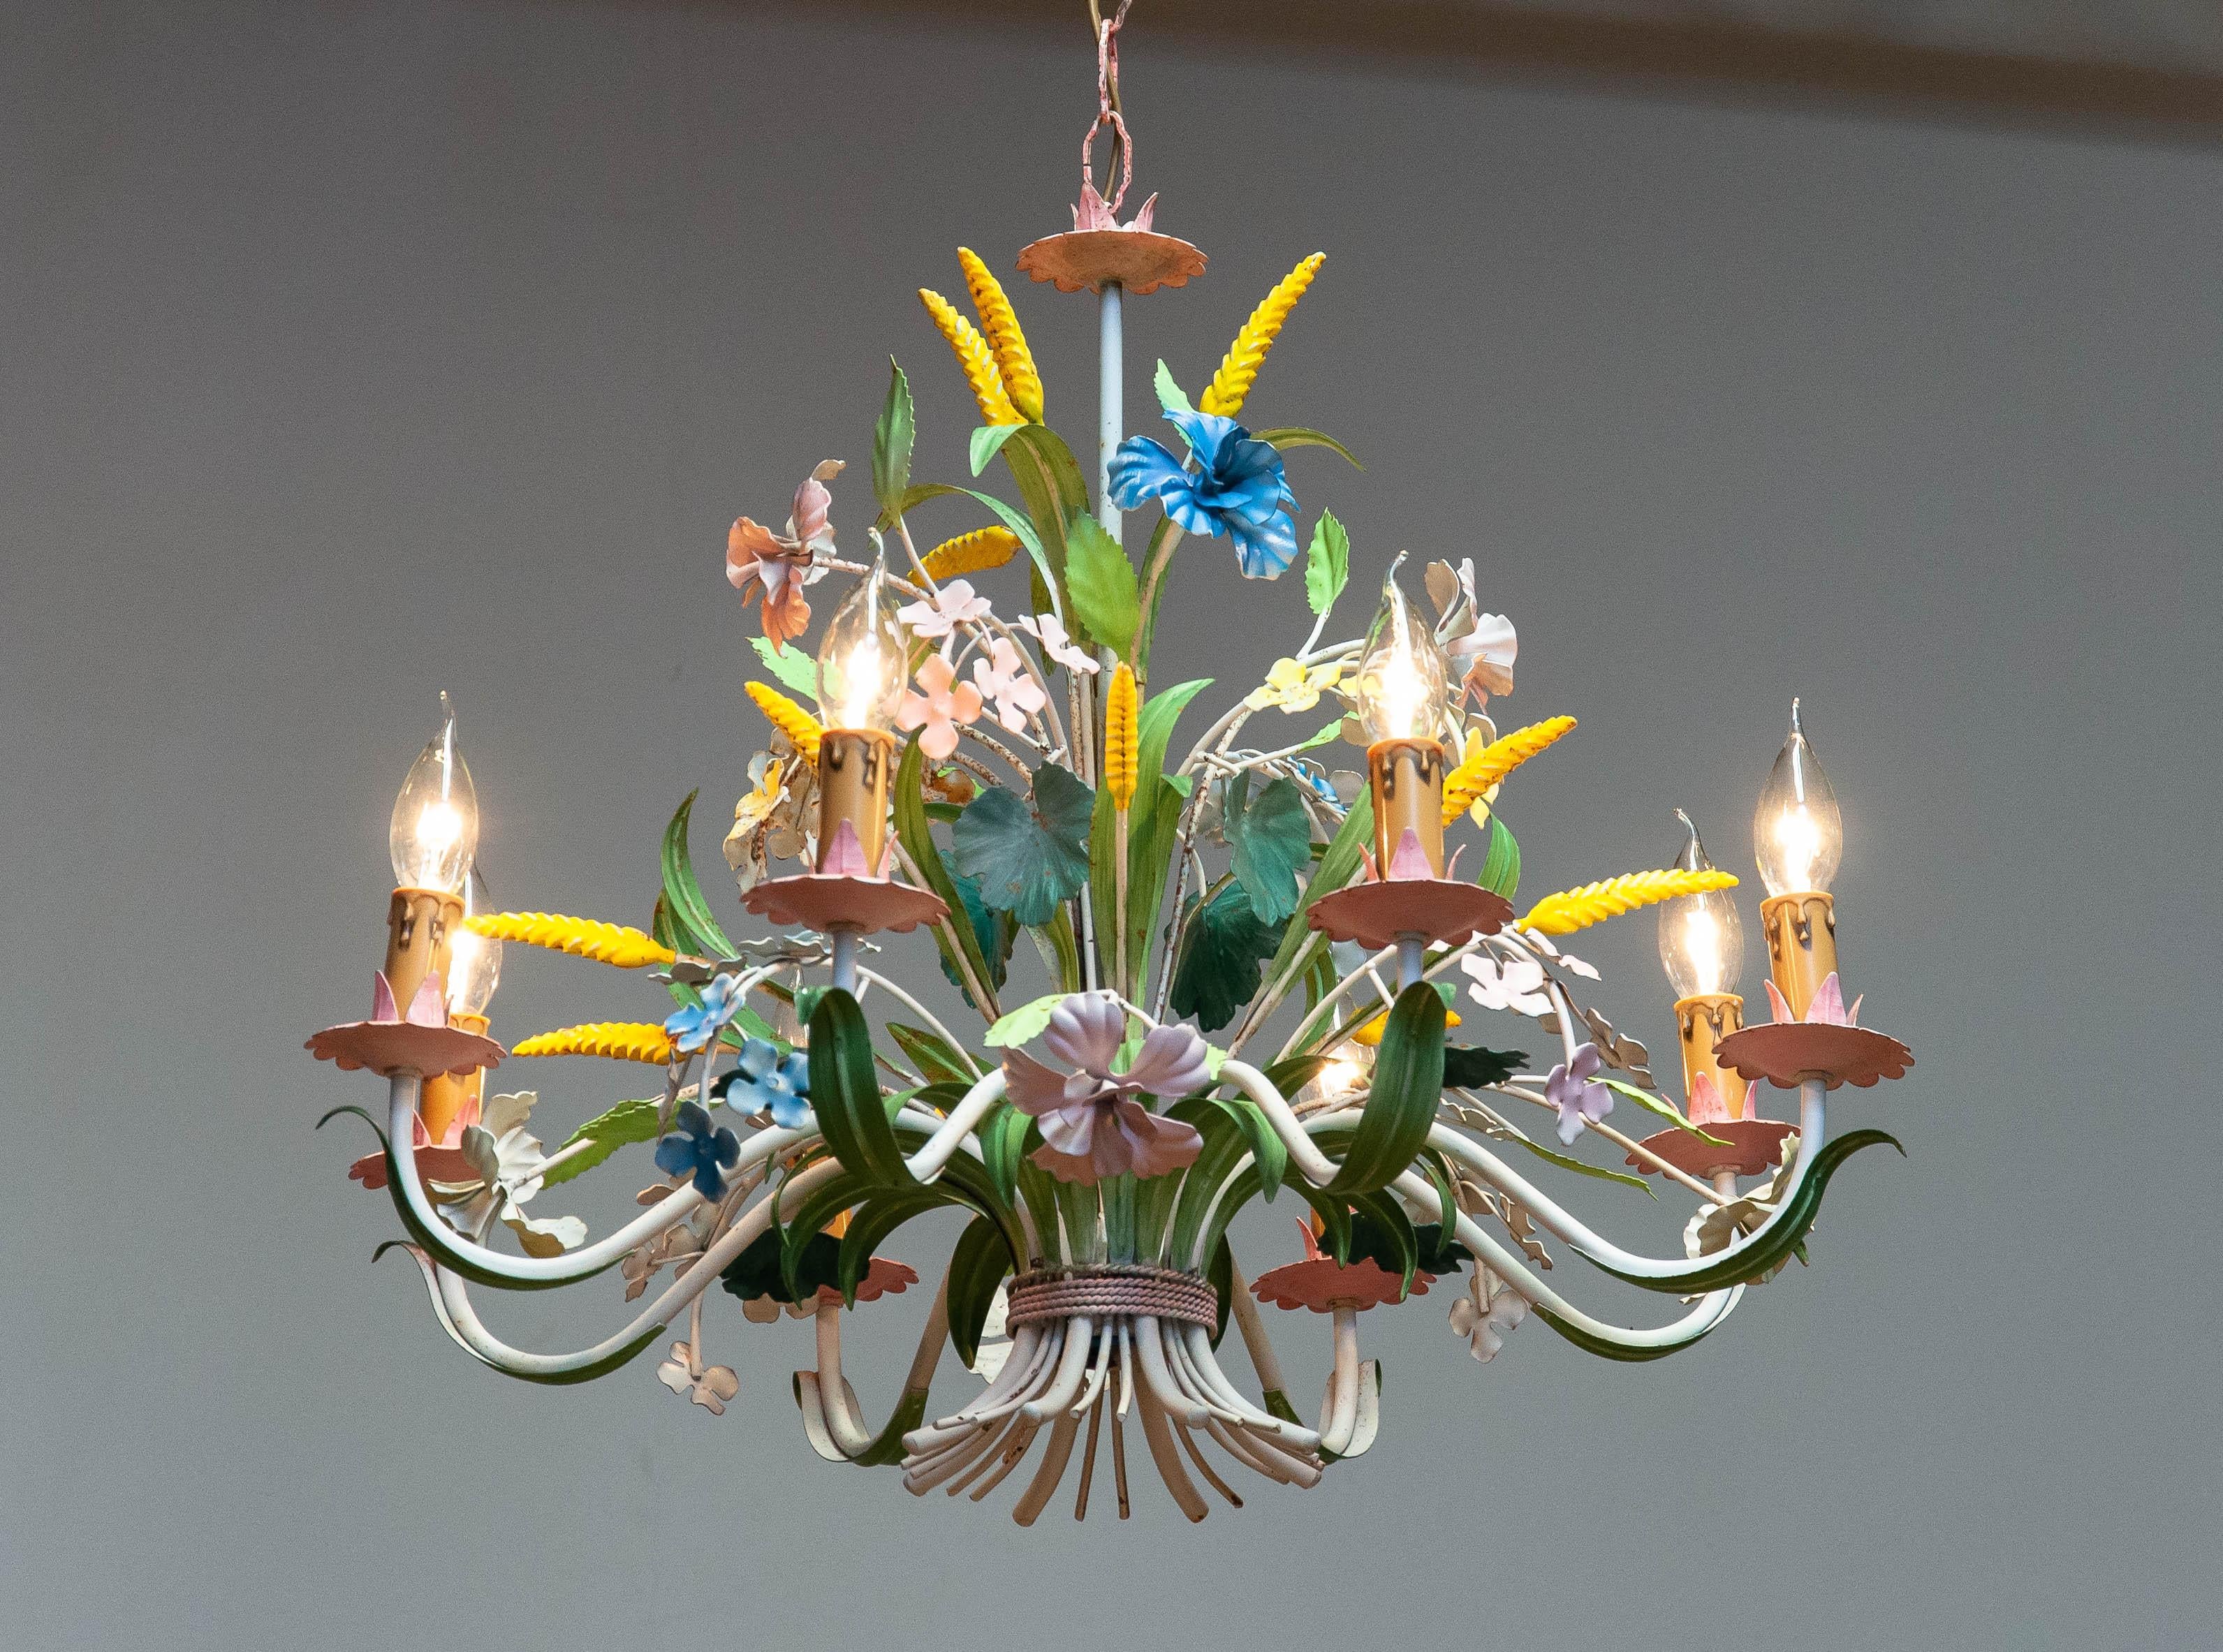 Absolutely beautiful large tole painted chandelier Made in the 1950s in Italy. Beautiful bright colors ar used to give this chandelier her fresh appearance and character.
Wiring has been replaced in a later period as well as the eight screw